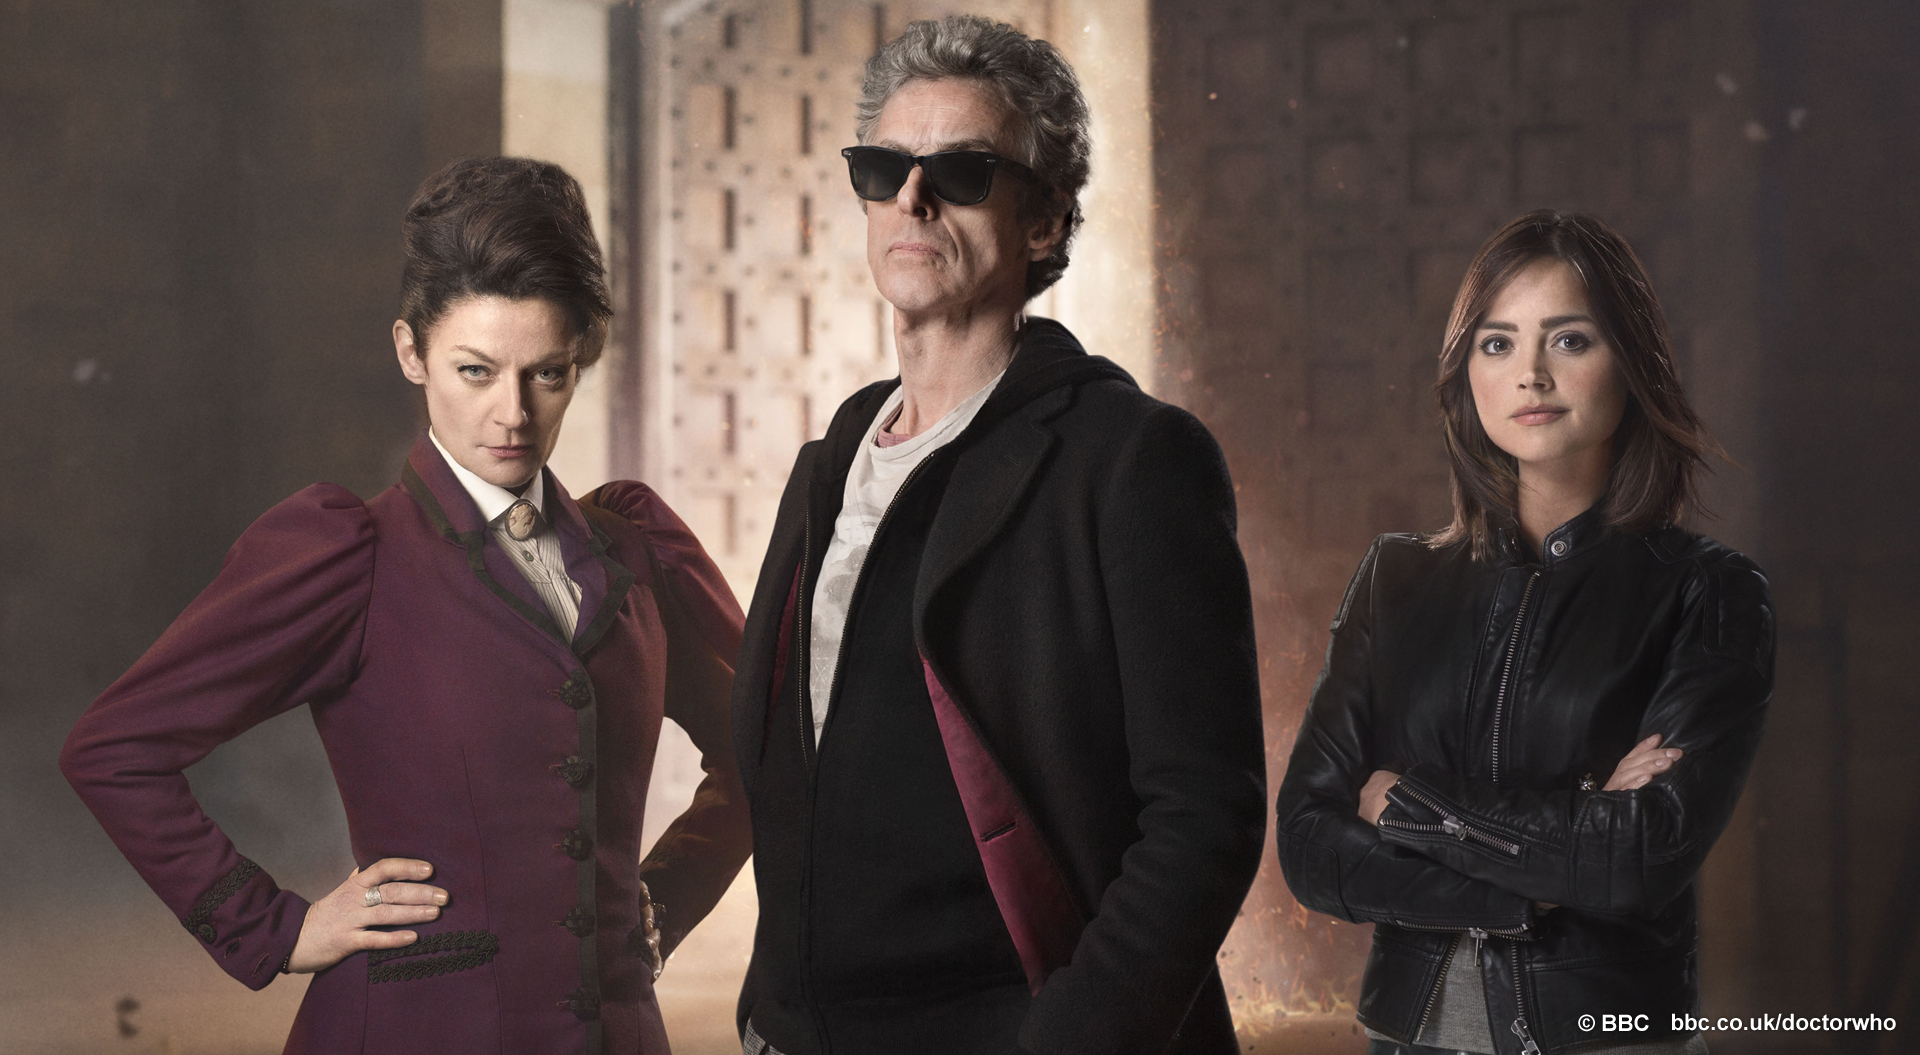 The Doctor Who Season Opener Is A Definite Return To Form